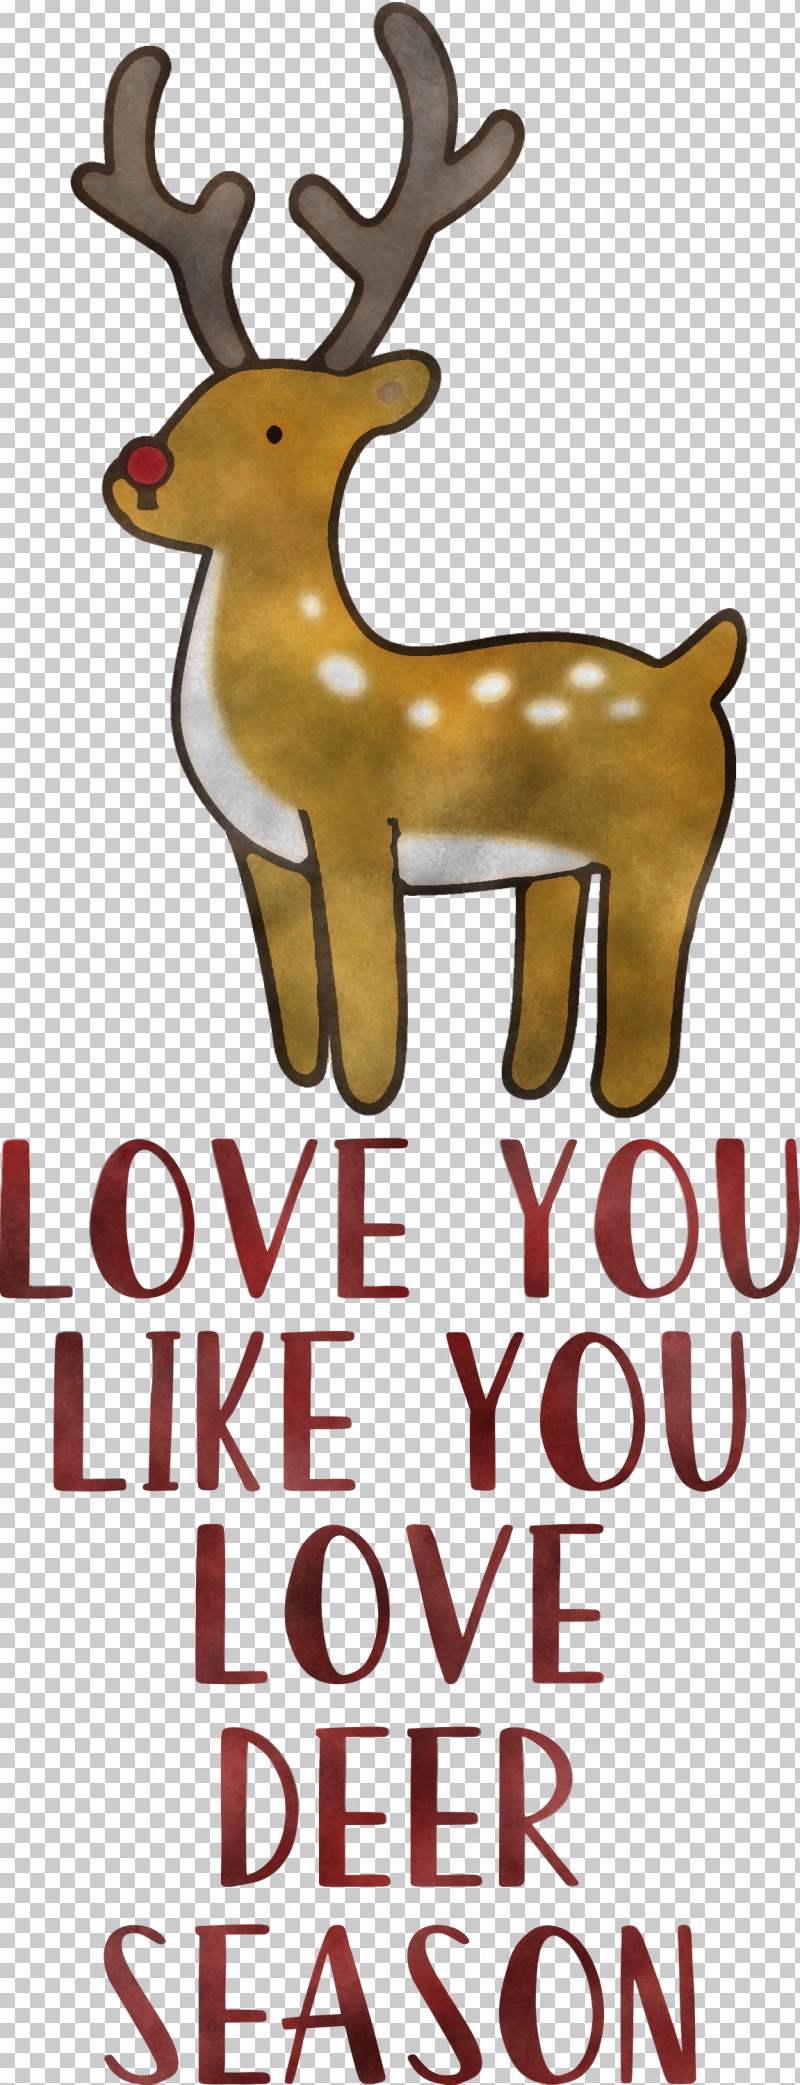 Love Deer Season PNG, Clipart, Christmas Archives, Data, Deer, Holiday, Love Free PNG Download